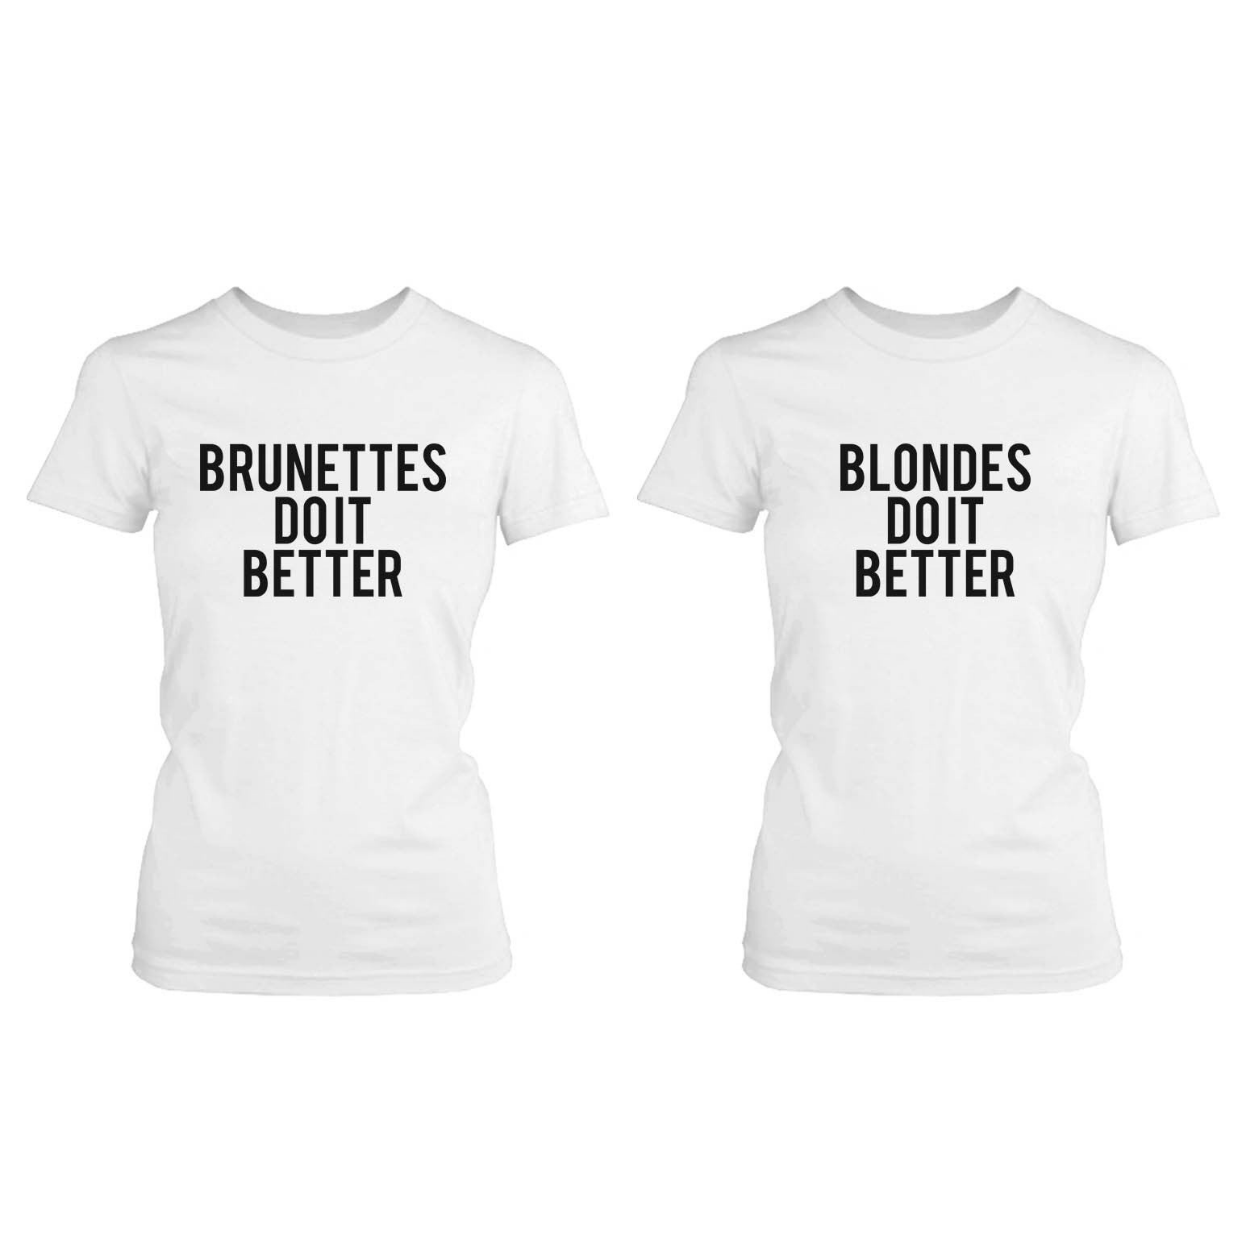 Best Friend Quote T Shirt- Blondes Brunettes Do Better - Matching Bff Shirt - 365 In Love